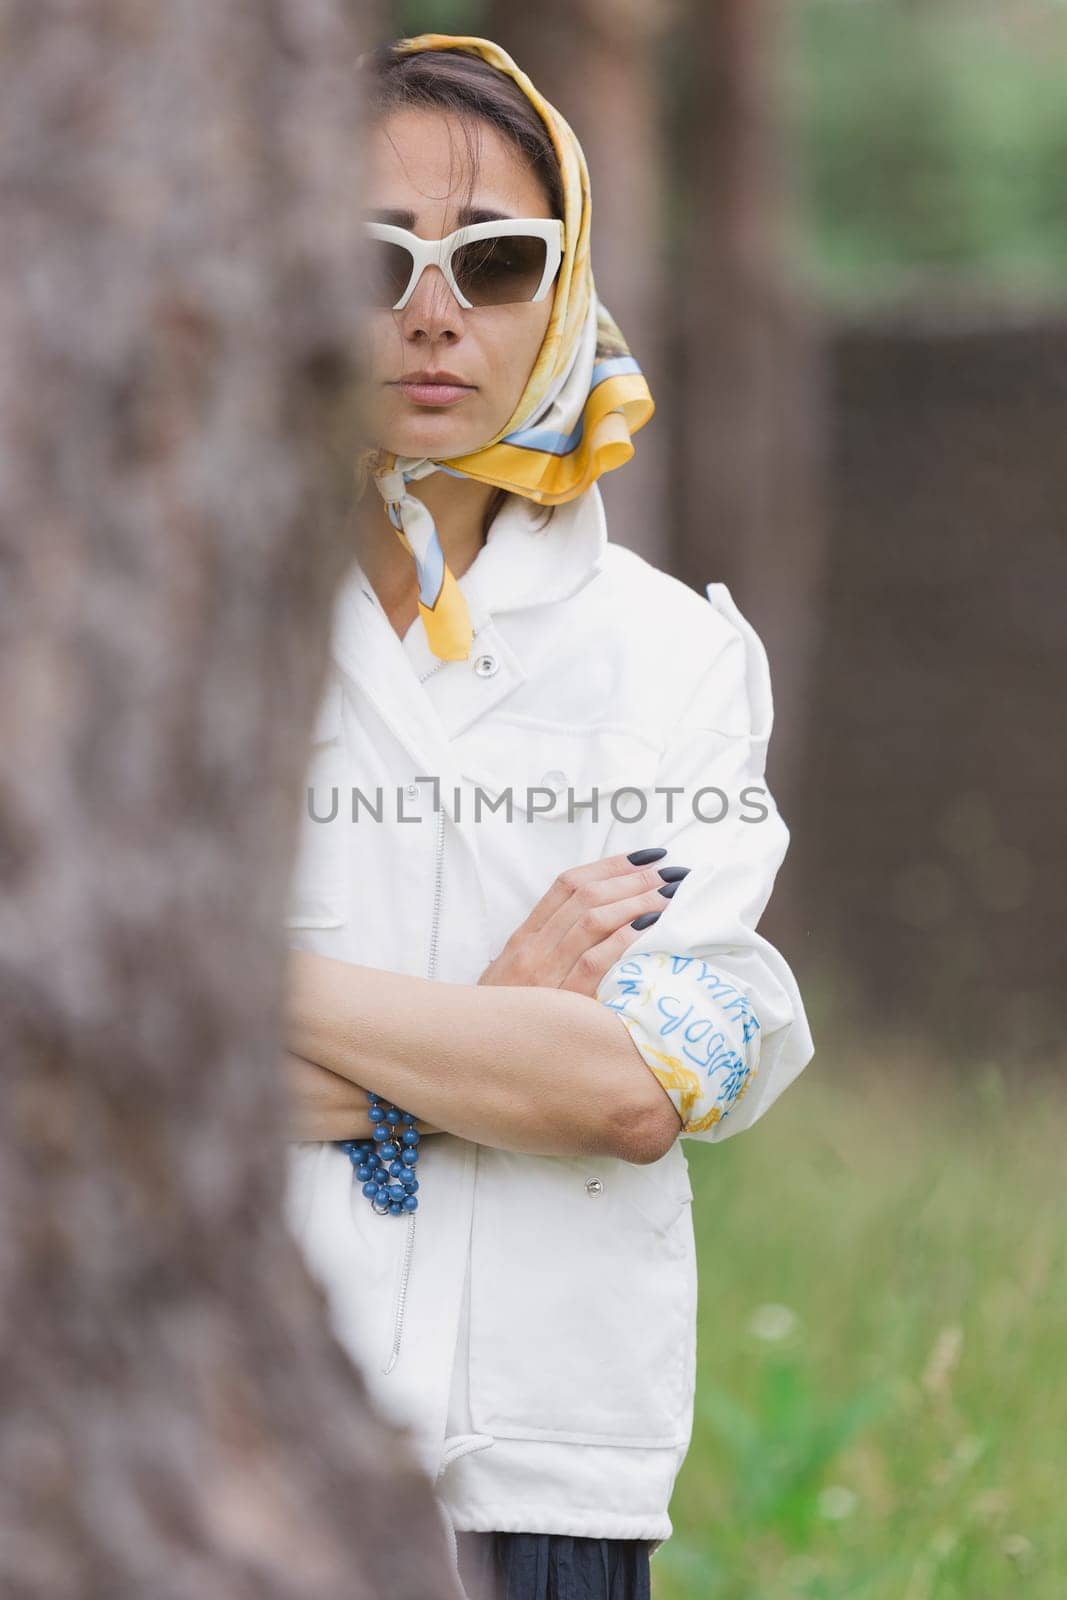 Fashion outdoor photo of beautiful young woman looking like elegant lady,wearing white jacket and accessories. Scarf trendy fashion accessory season